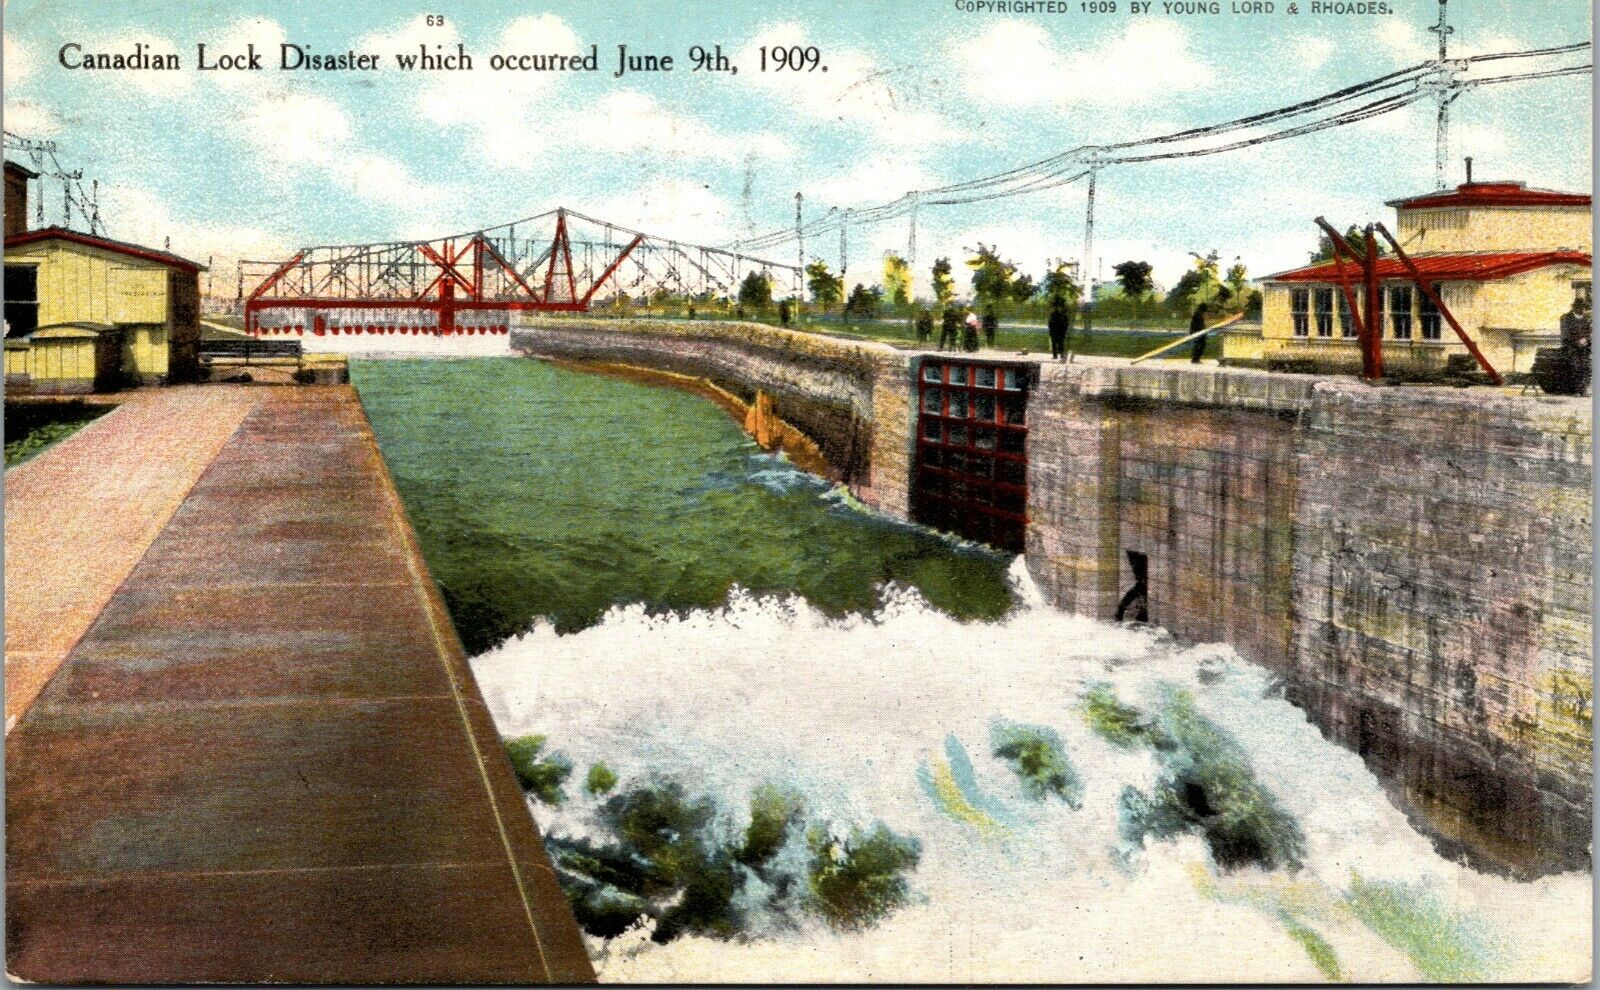 CANADIAN LOCK DISASTER 1909 POSTCARD POSTED 1909